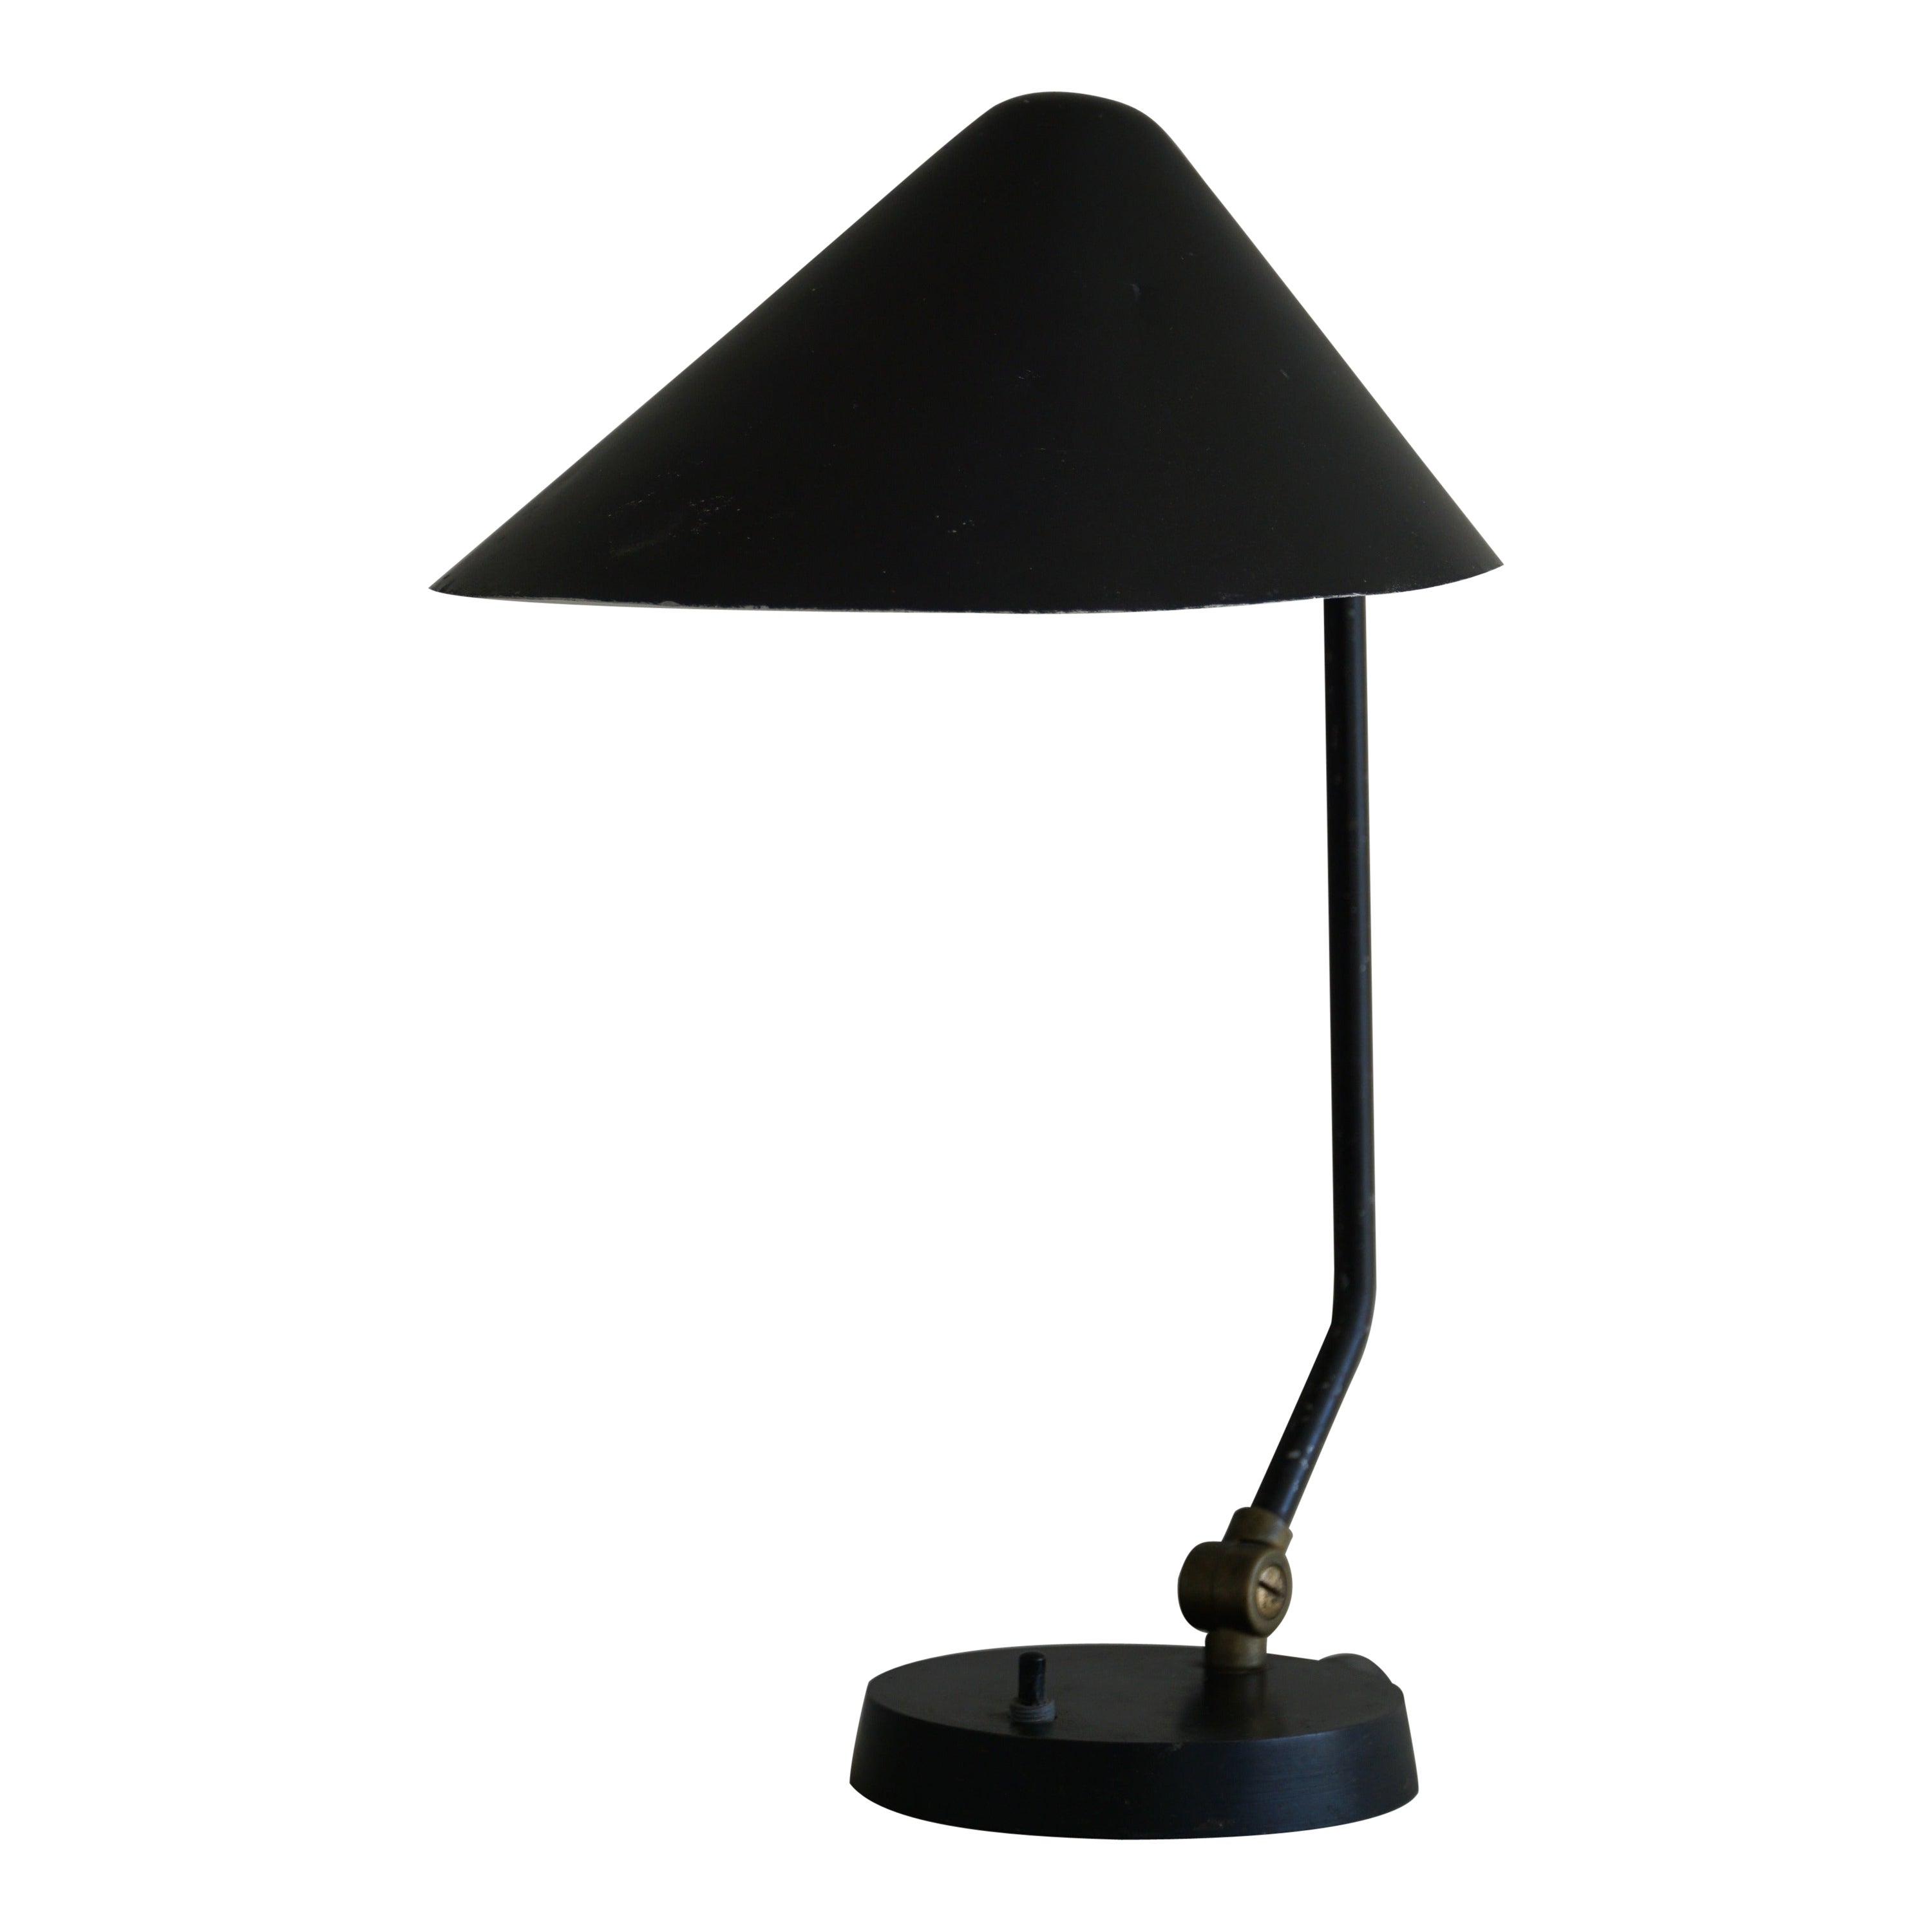 Danish Modern Adjustable Table Lamp in Metal, Made by Louis Poulsen, 1950s For Sale